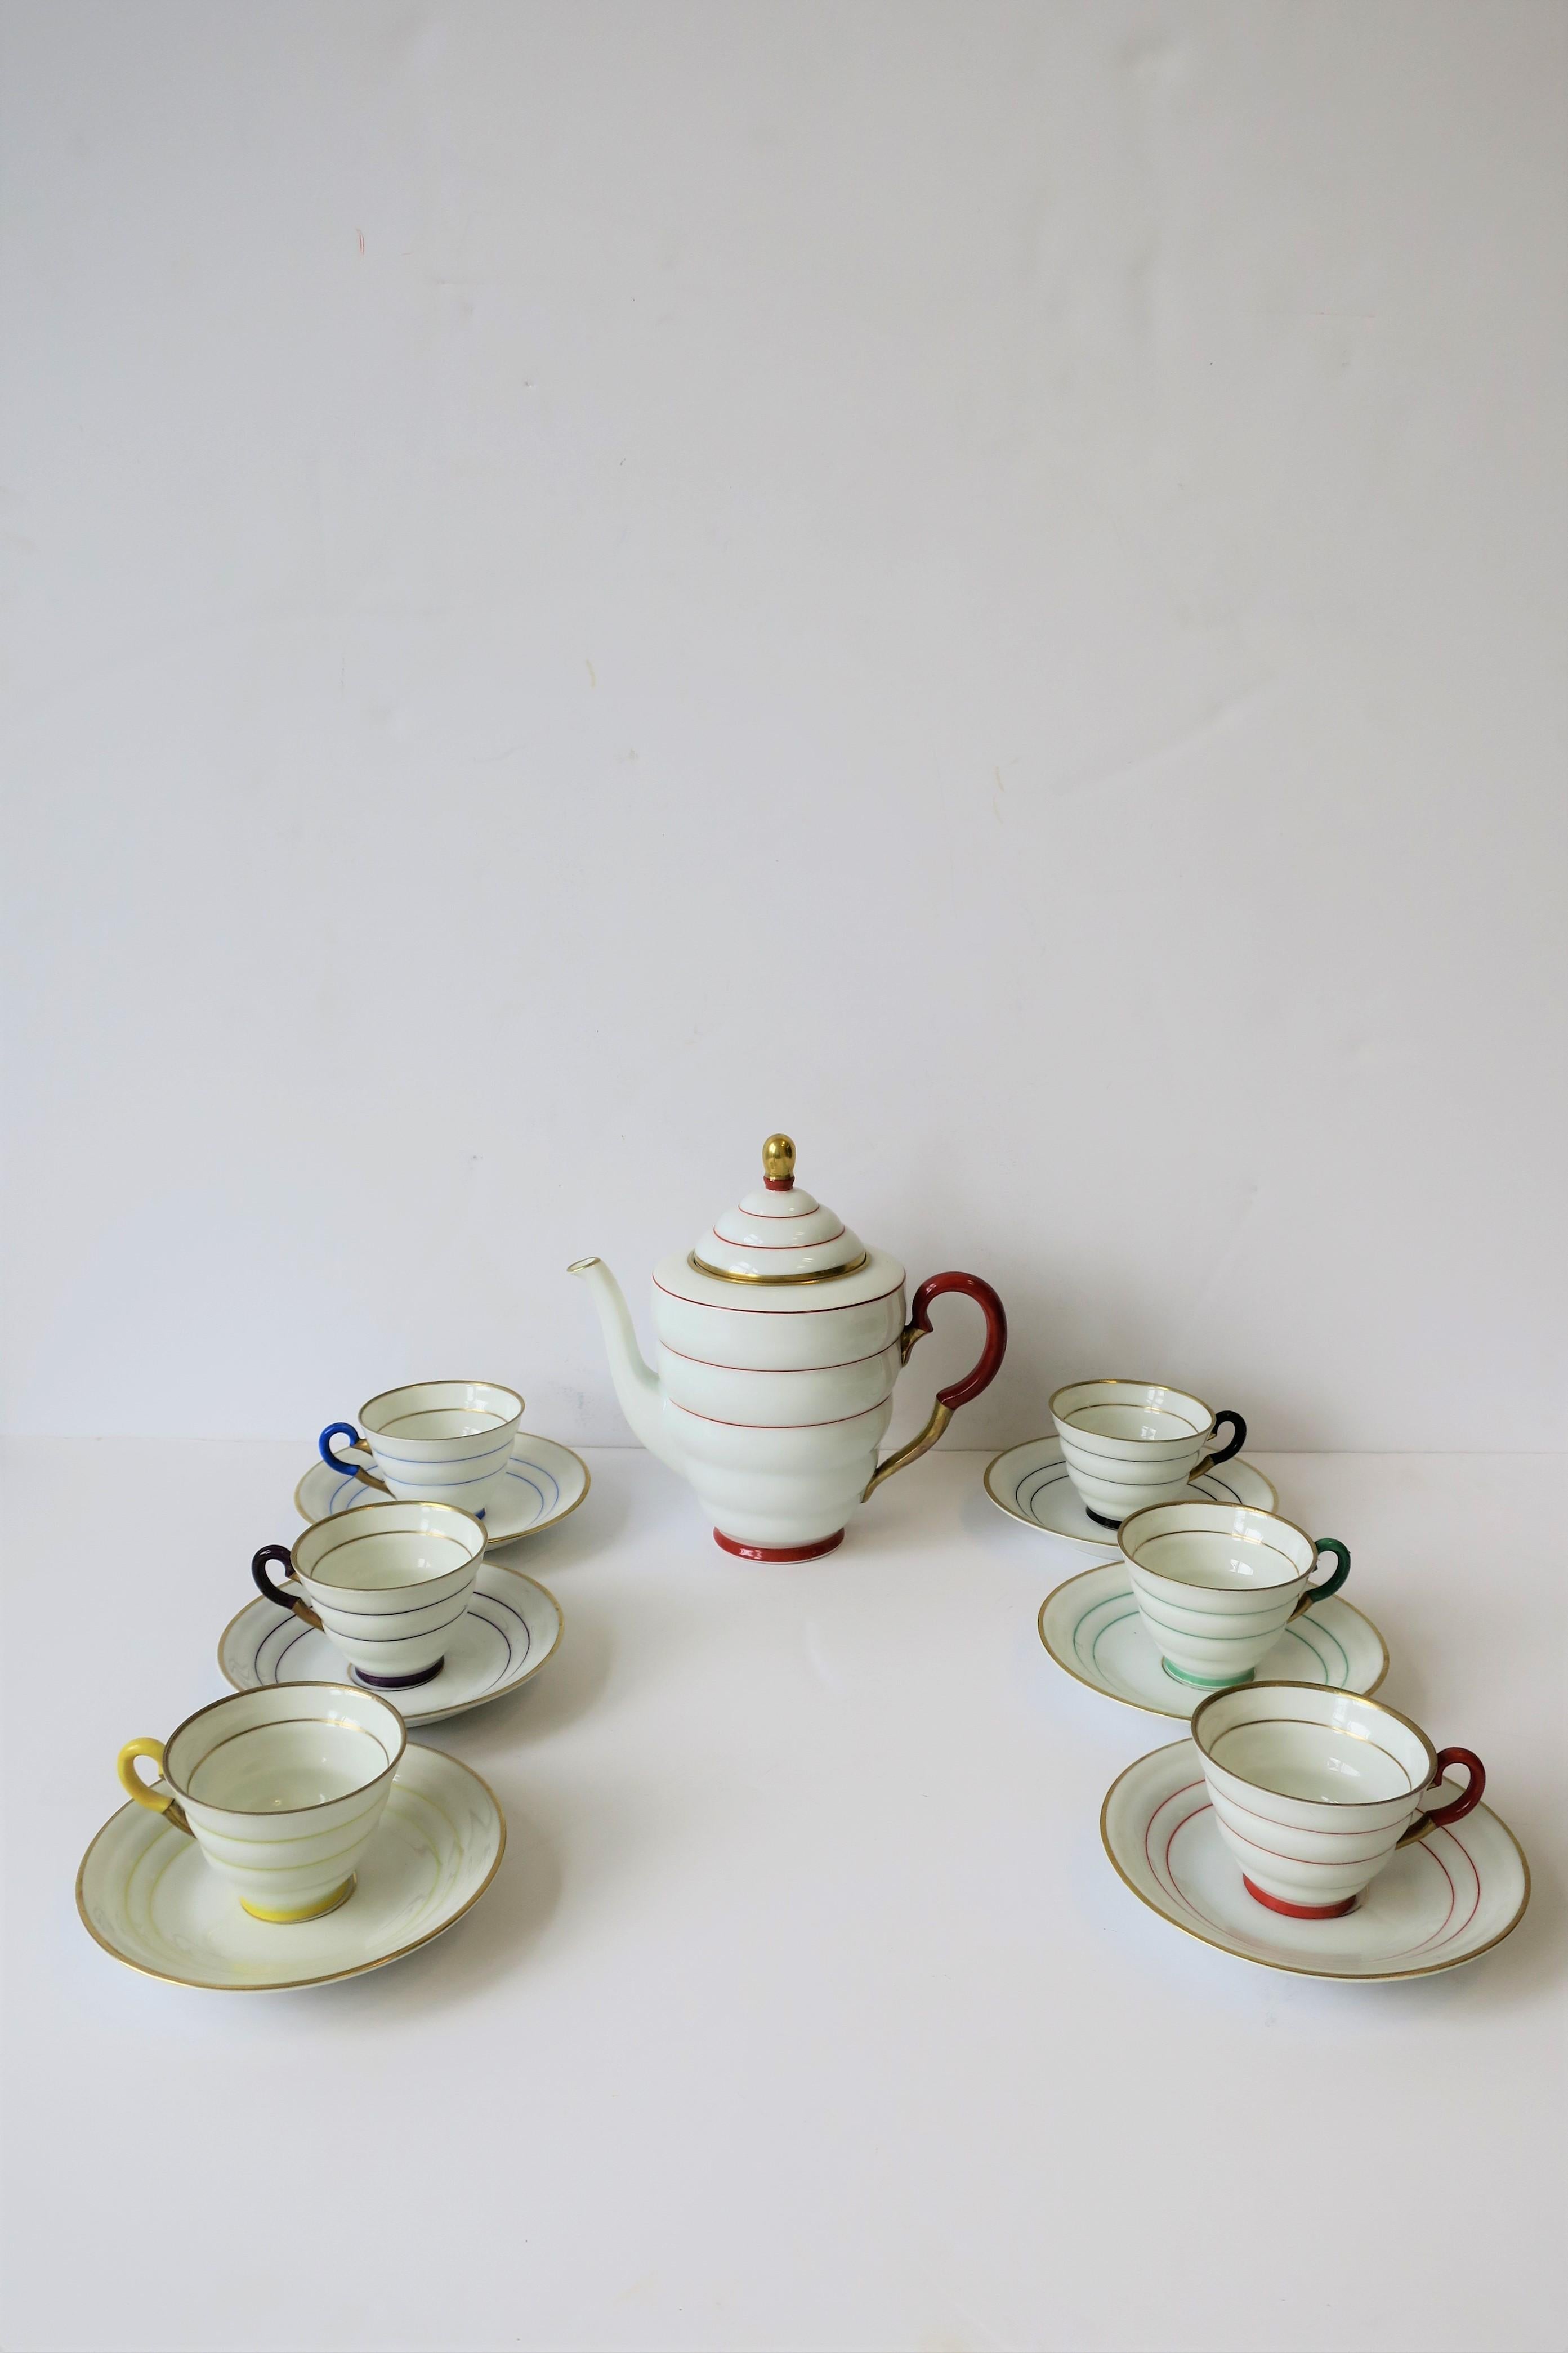 A gorgeous Scandinavian Modern handmade porcelain espresso/coffee or tea demitasse set from Sweden. Beautifully made with six different colors accompanied with gold. Colors include: White porcelain with terracotta/gold, black/gold, emerald